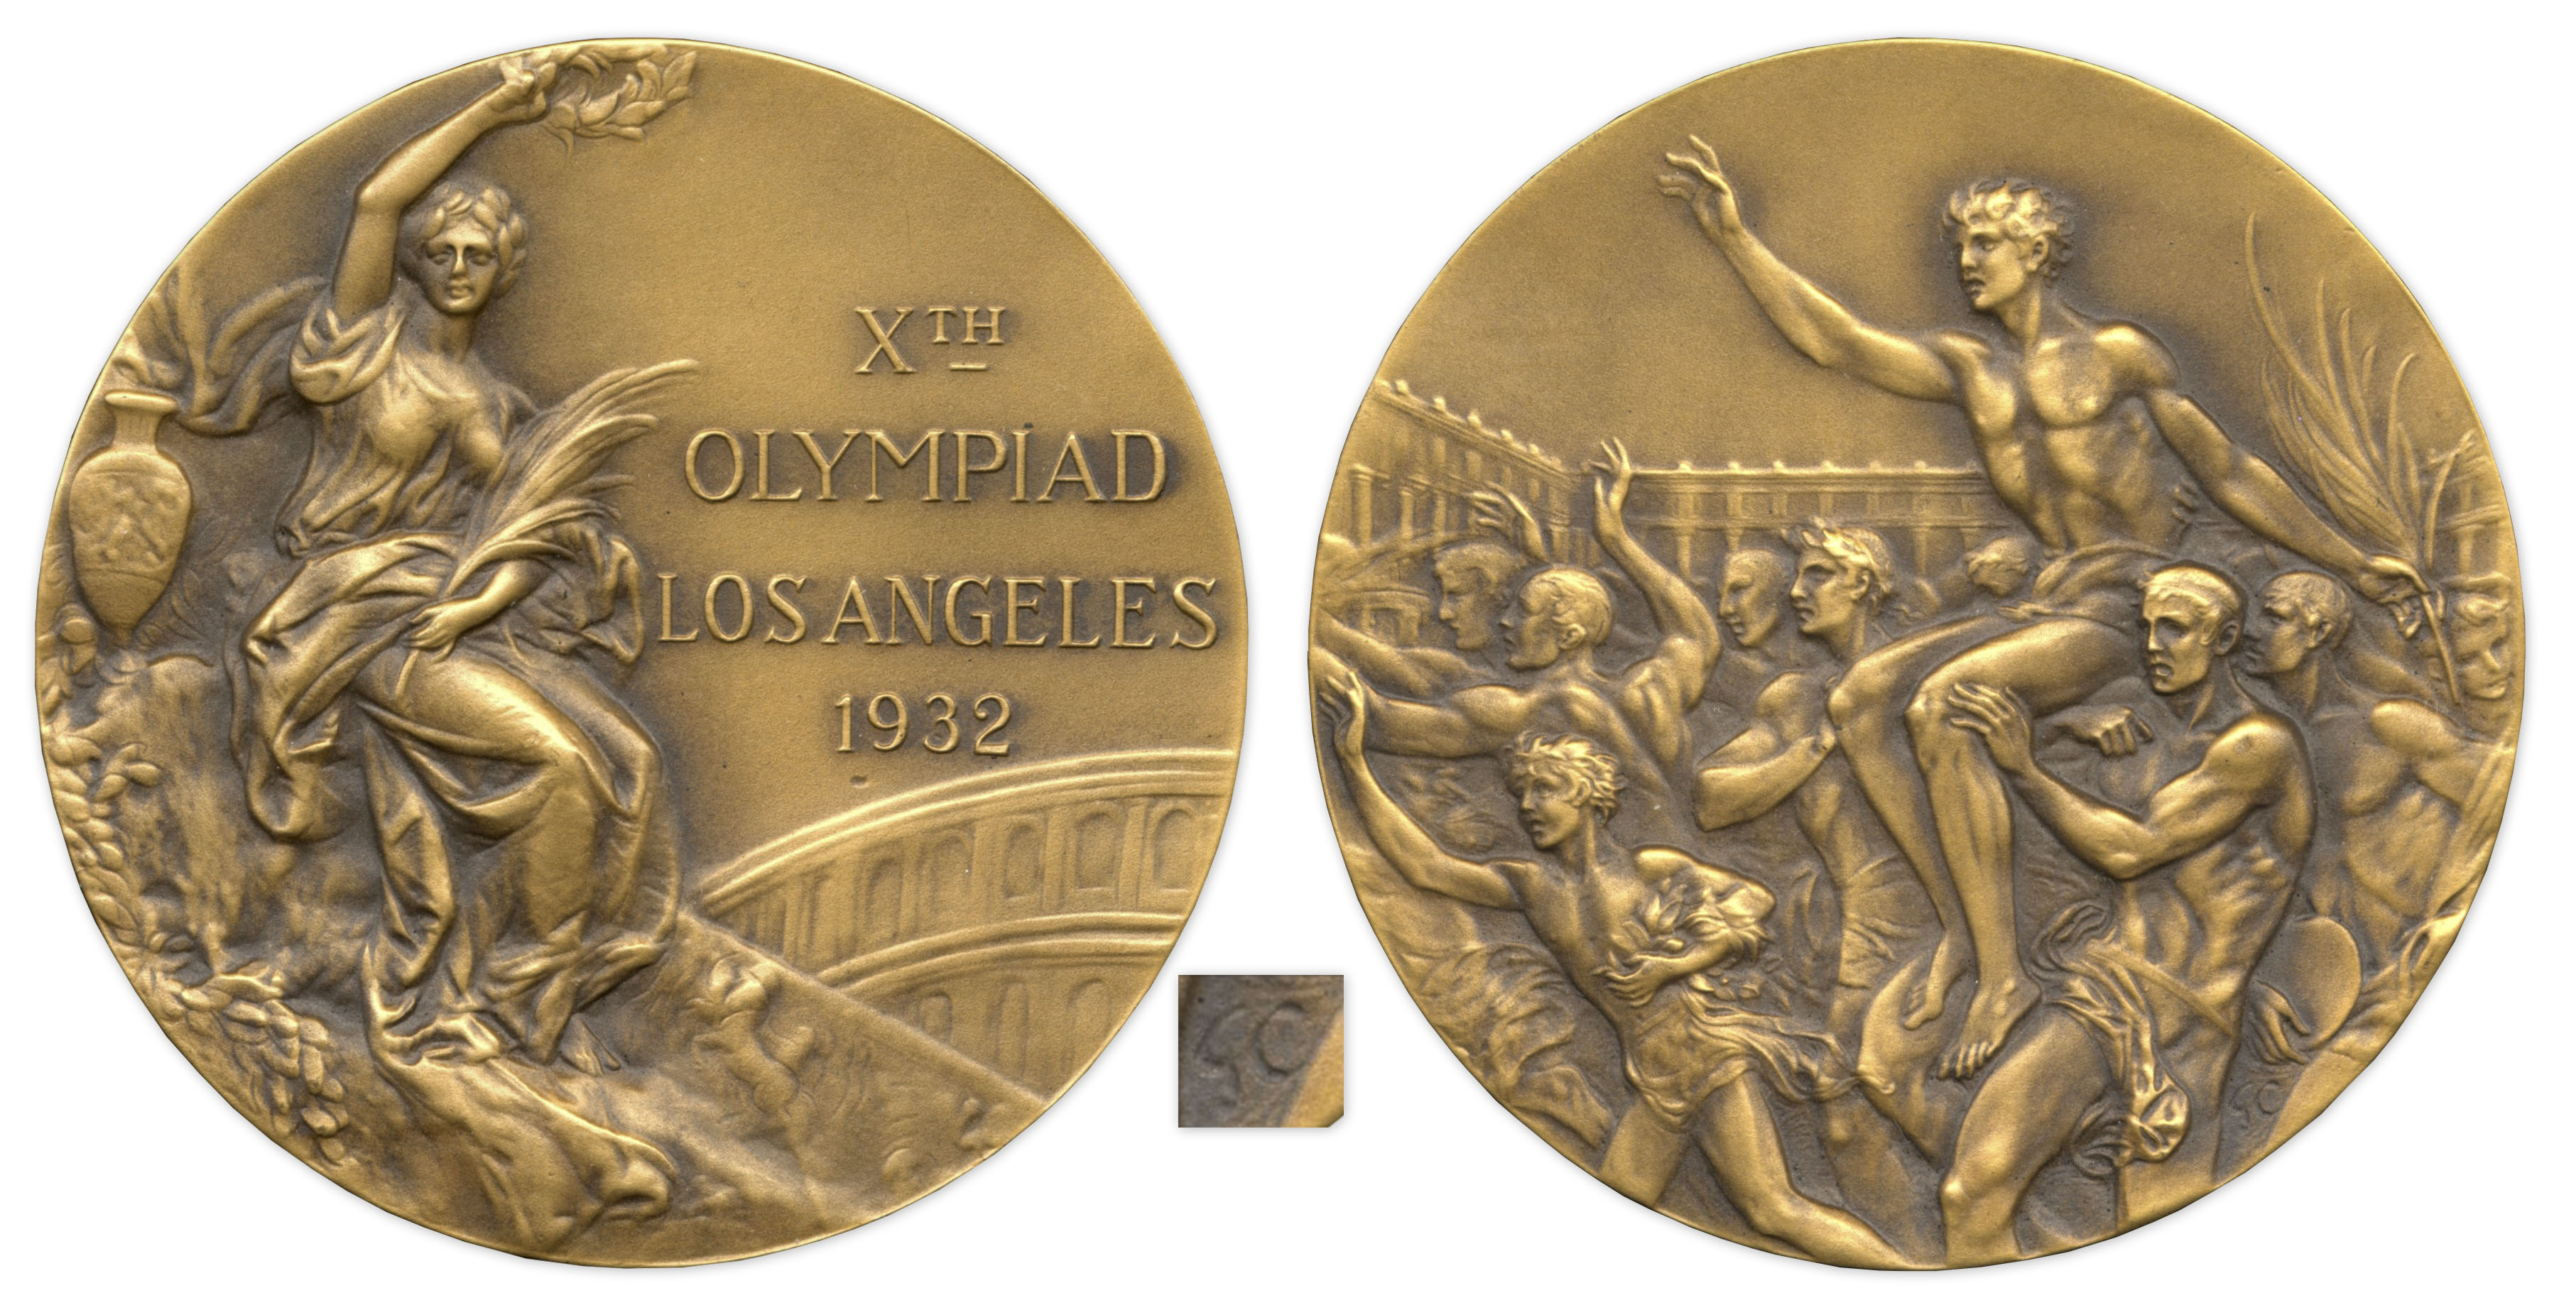 Sell a Bronze 1932 Los Angeles Olympics Medal / Nate D Sanders Auction